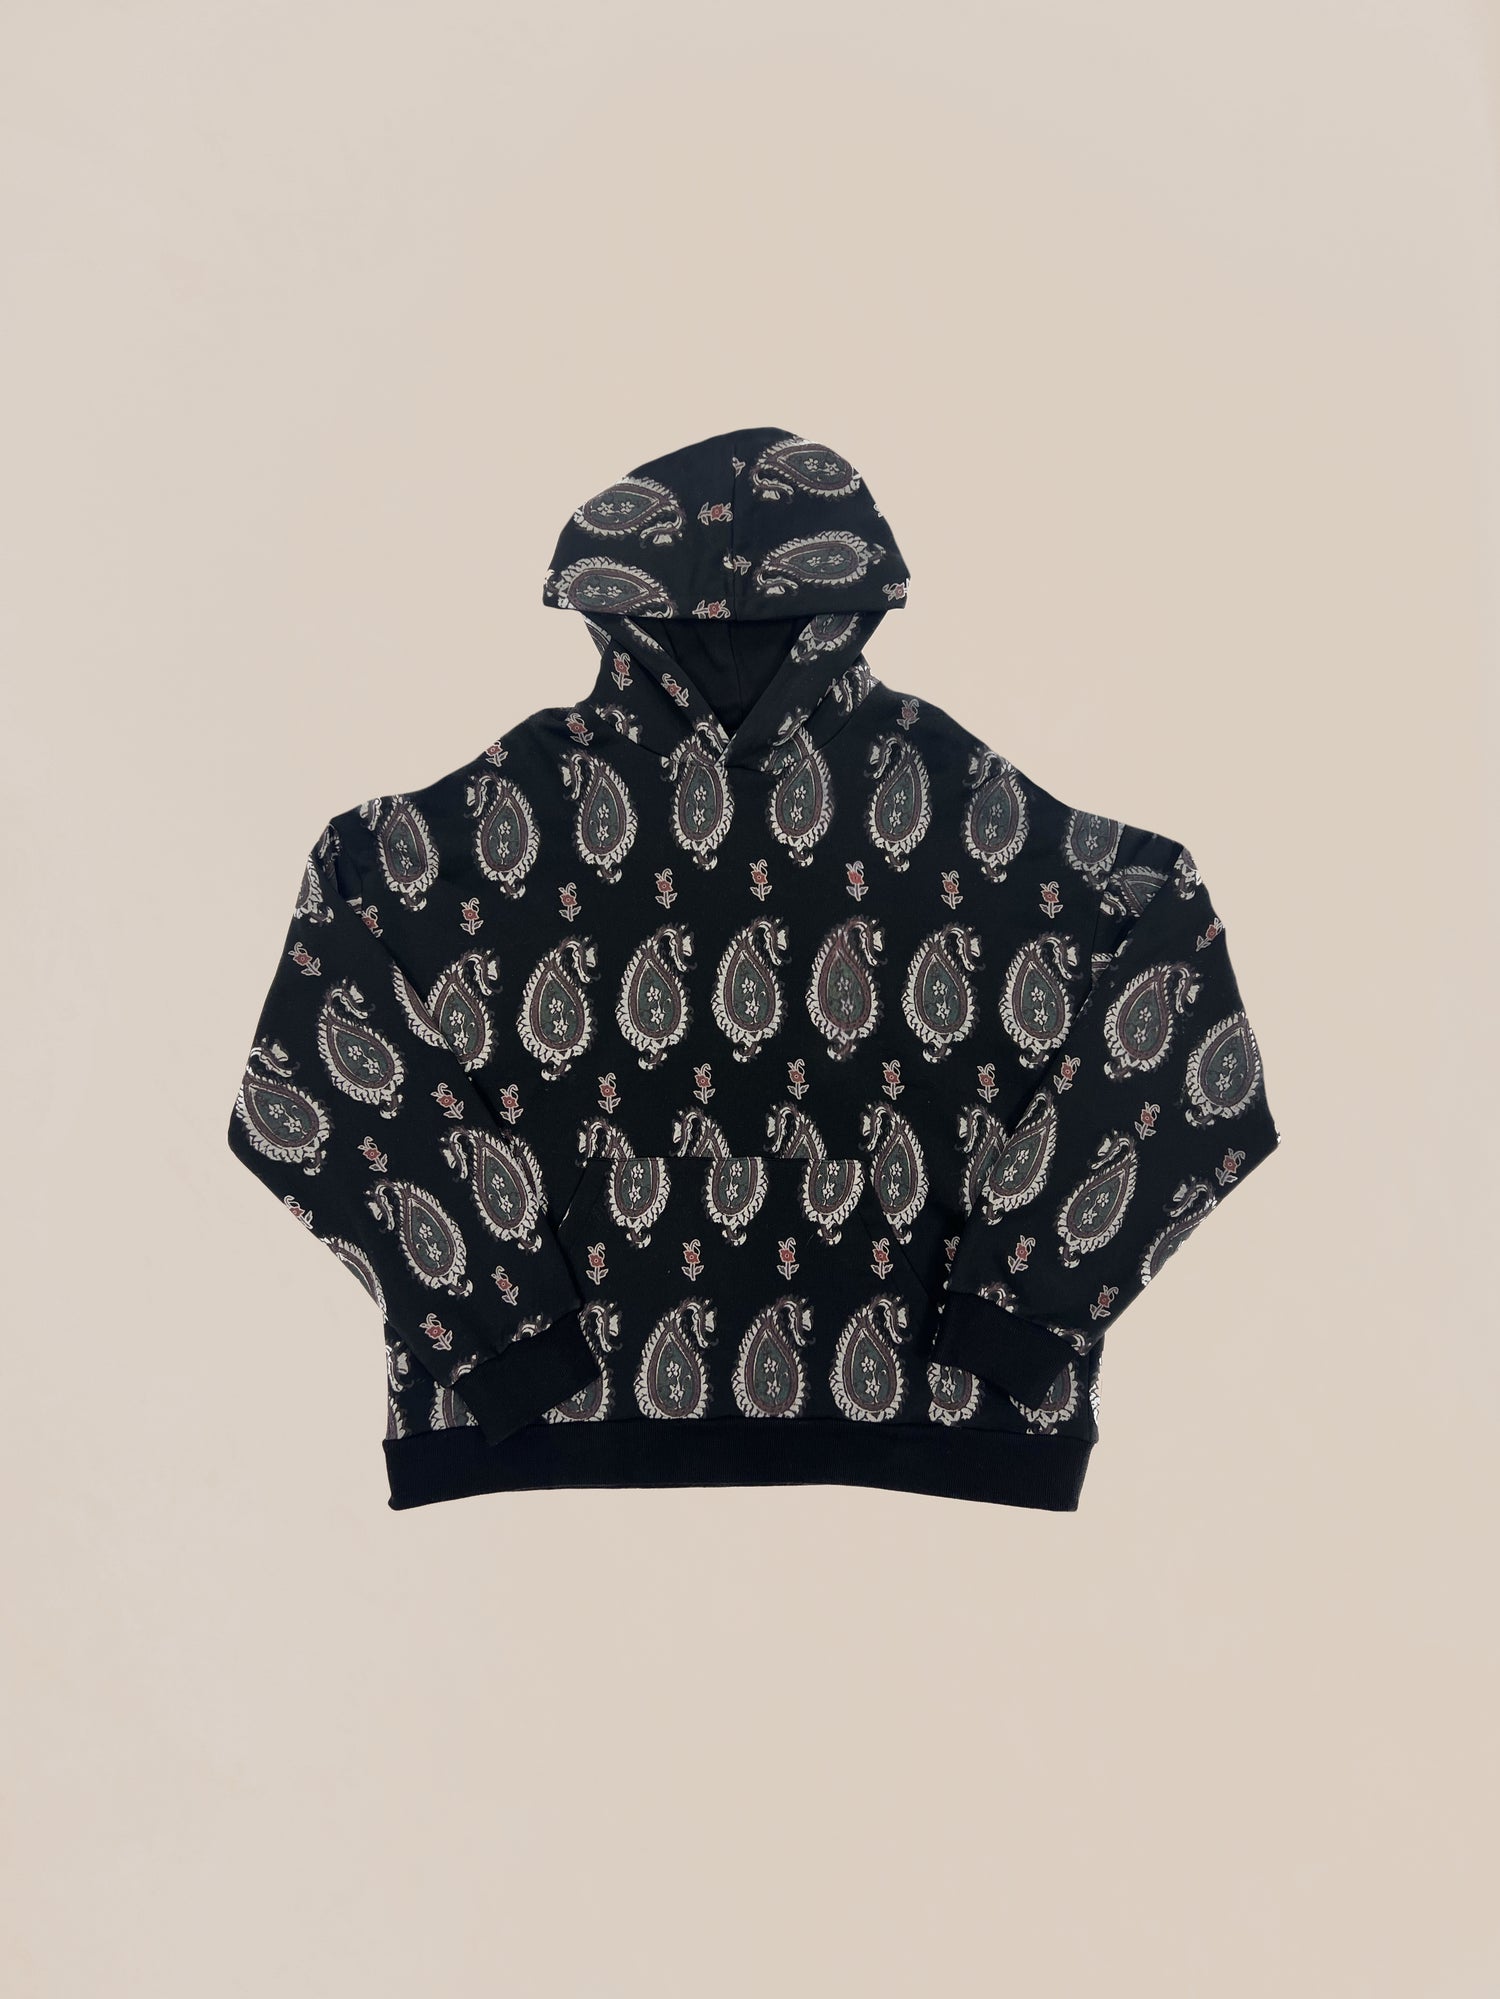 Black Sample 12 (Paisley Monogram Hoodie) with paisley pattern on a neutral background by Profound.